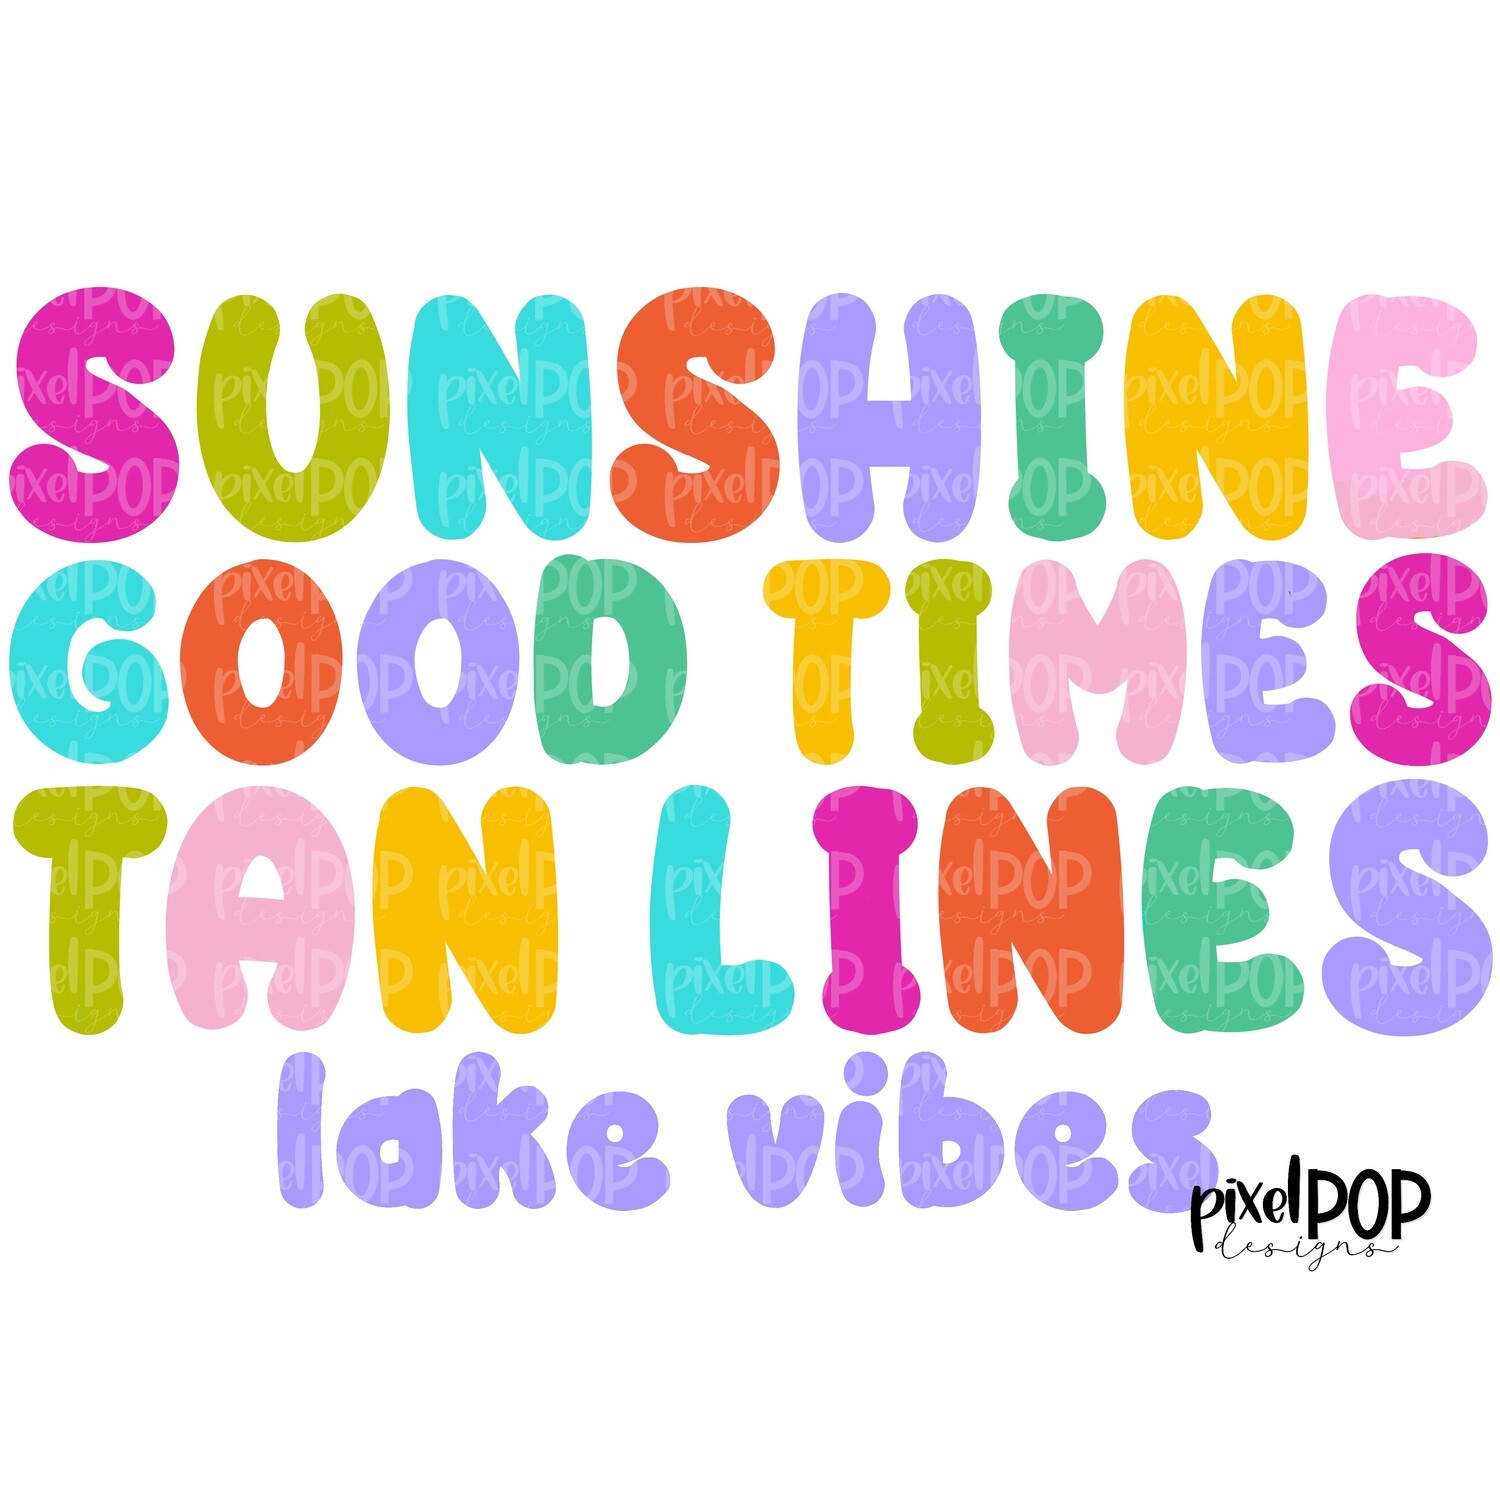 Lake Vibes Good Times Colorful PNG | Lake Vibes | Summer | Warm Weather | Digital Download | Printable Art | Clip Art